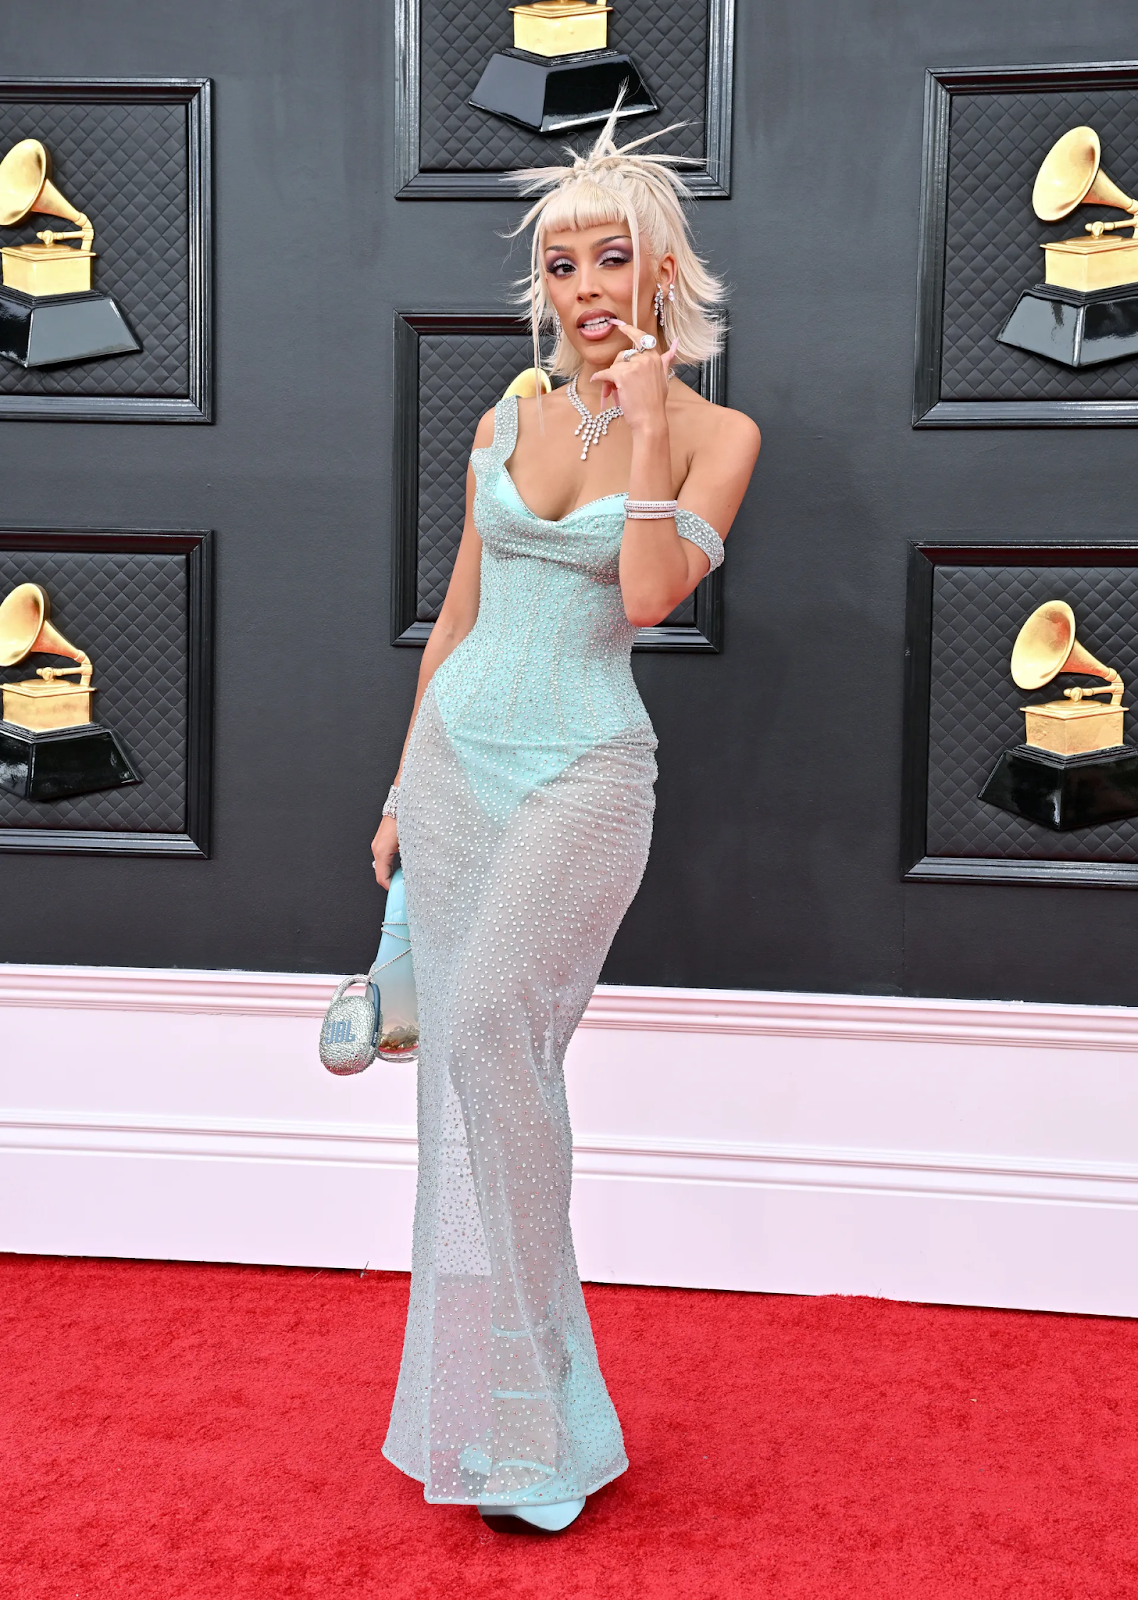 lady wearing sheer dress at the Grammys red carpet